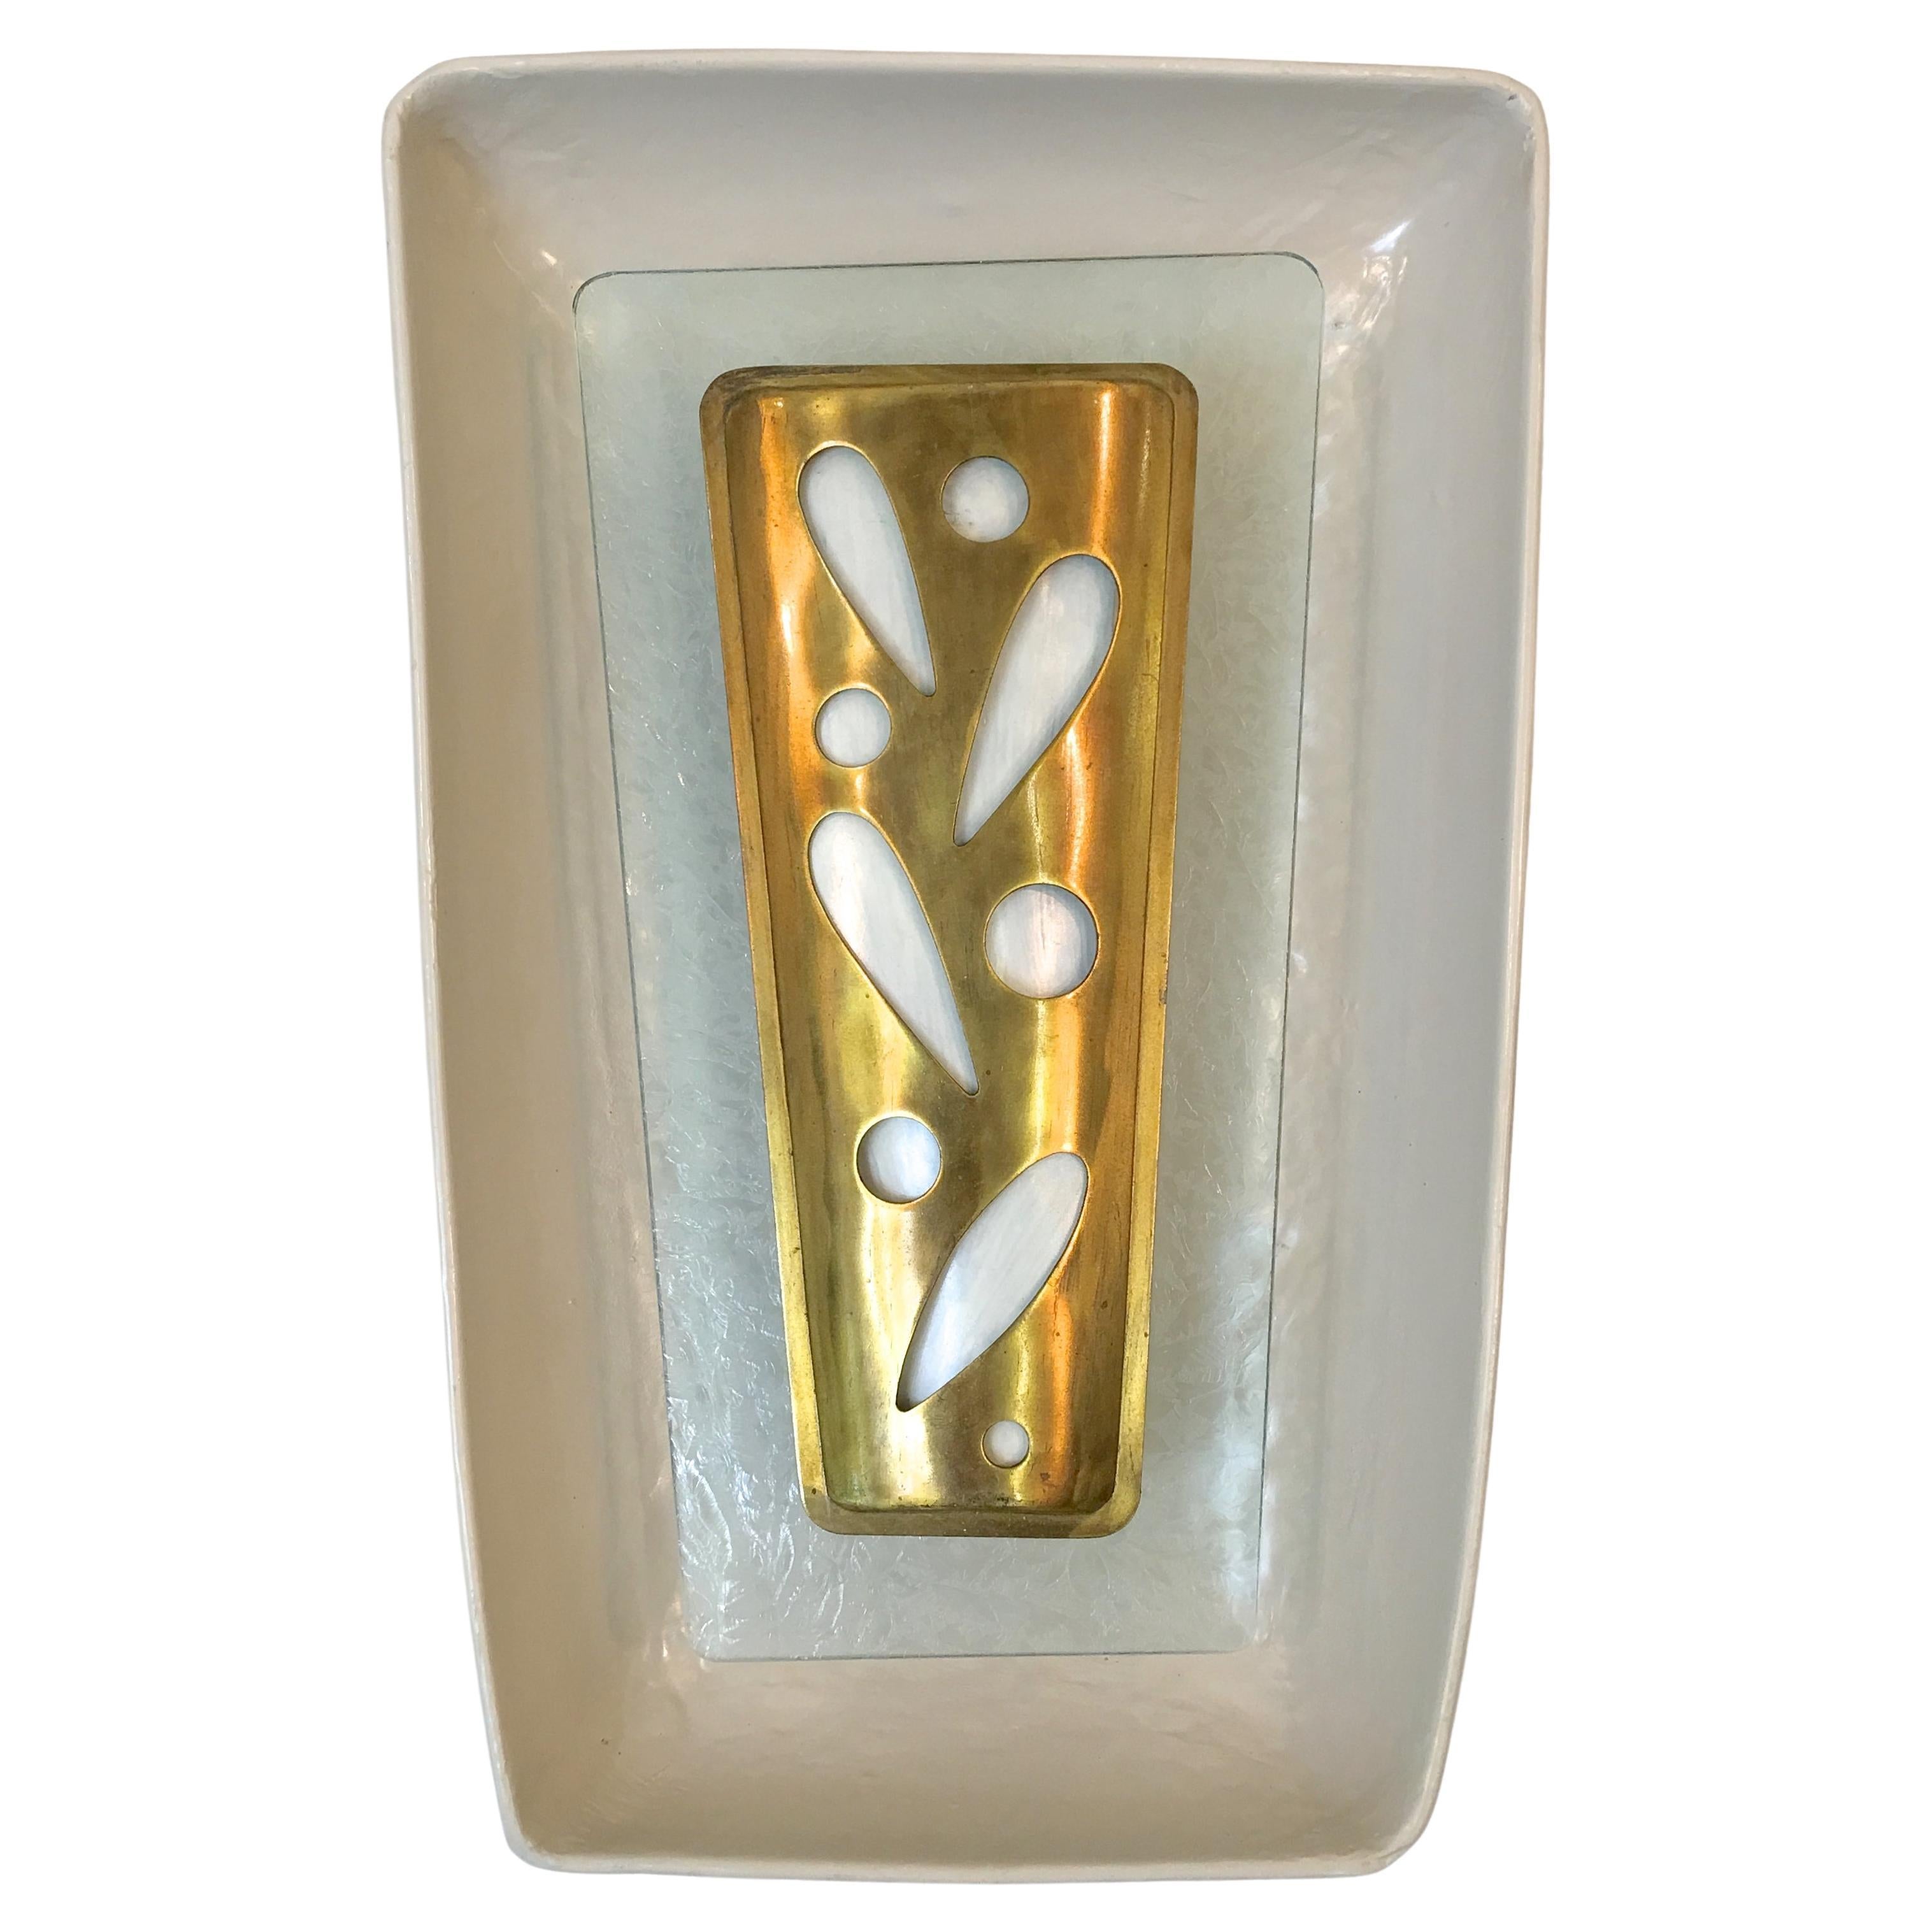 Gio Ponti Wall Sconce from the m/s Augustus Italian Ocean Liner 1951